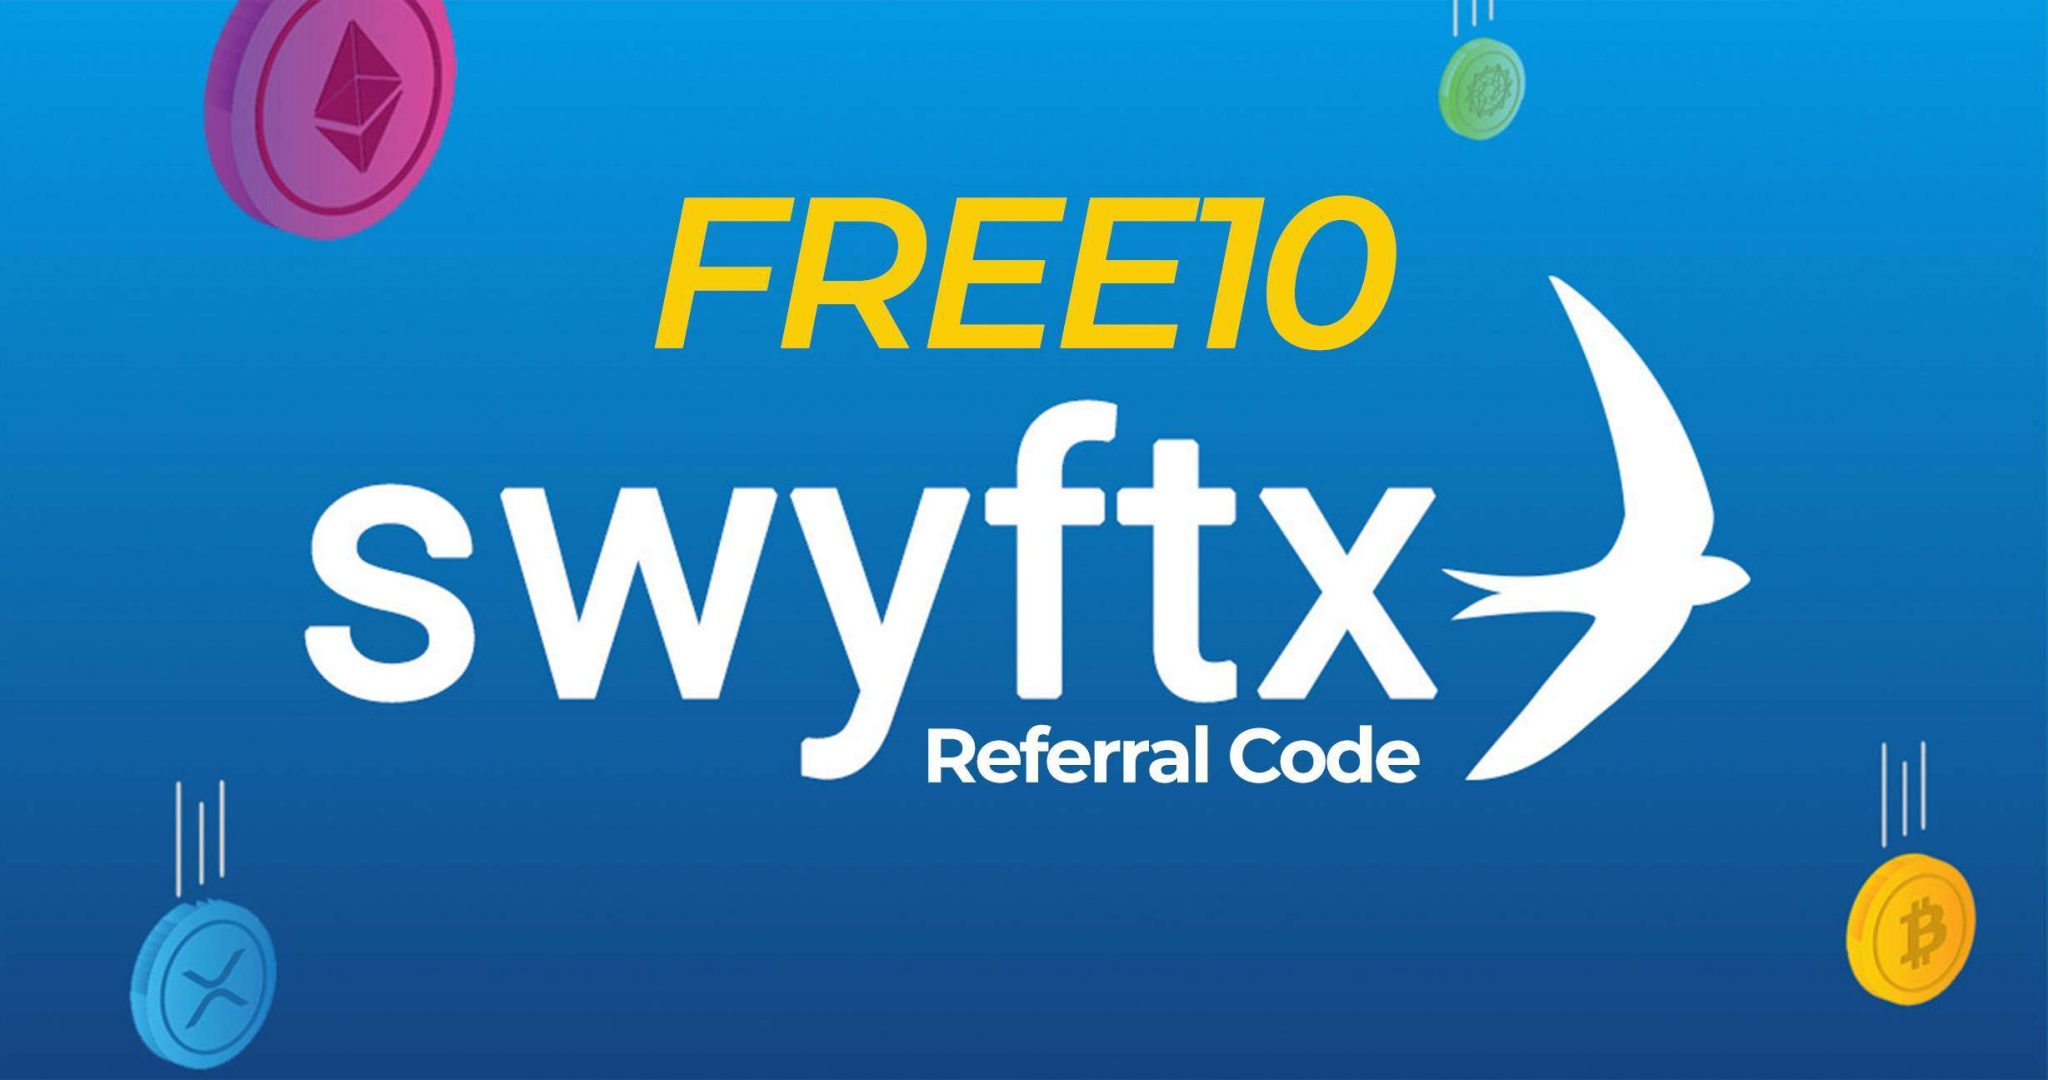 Swyftx Referral Code Feature